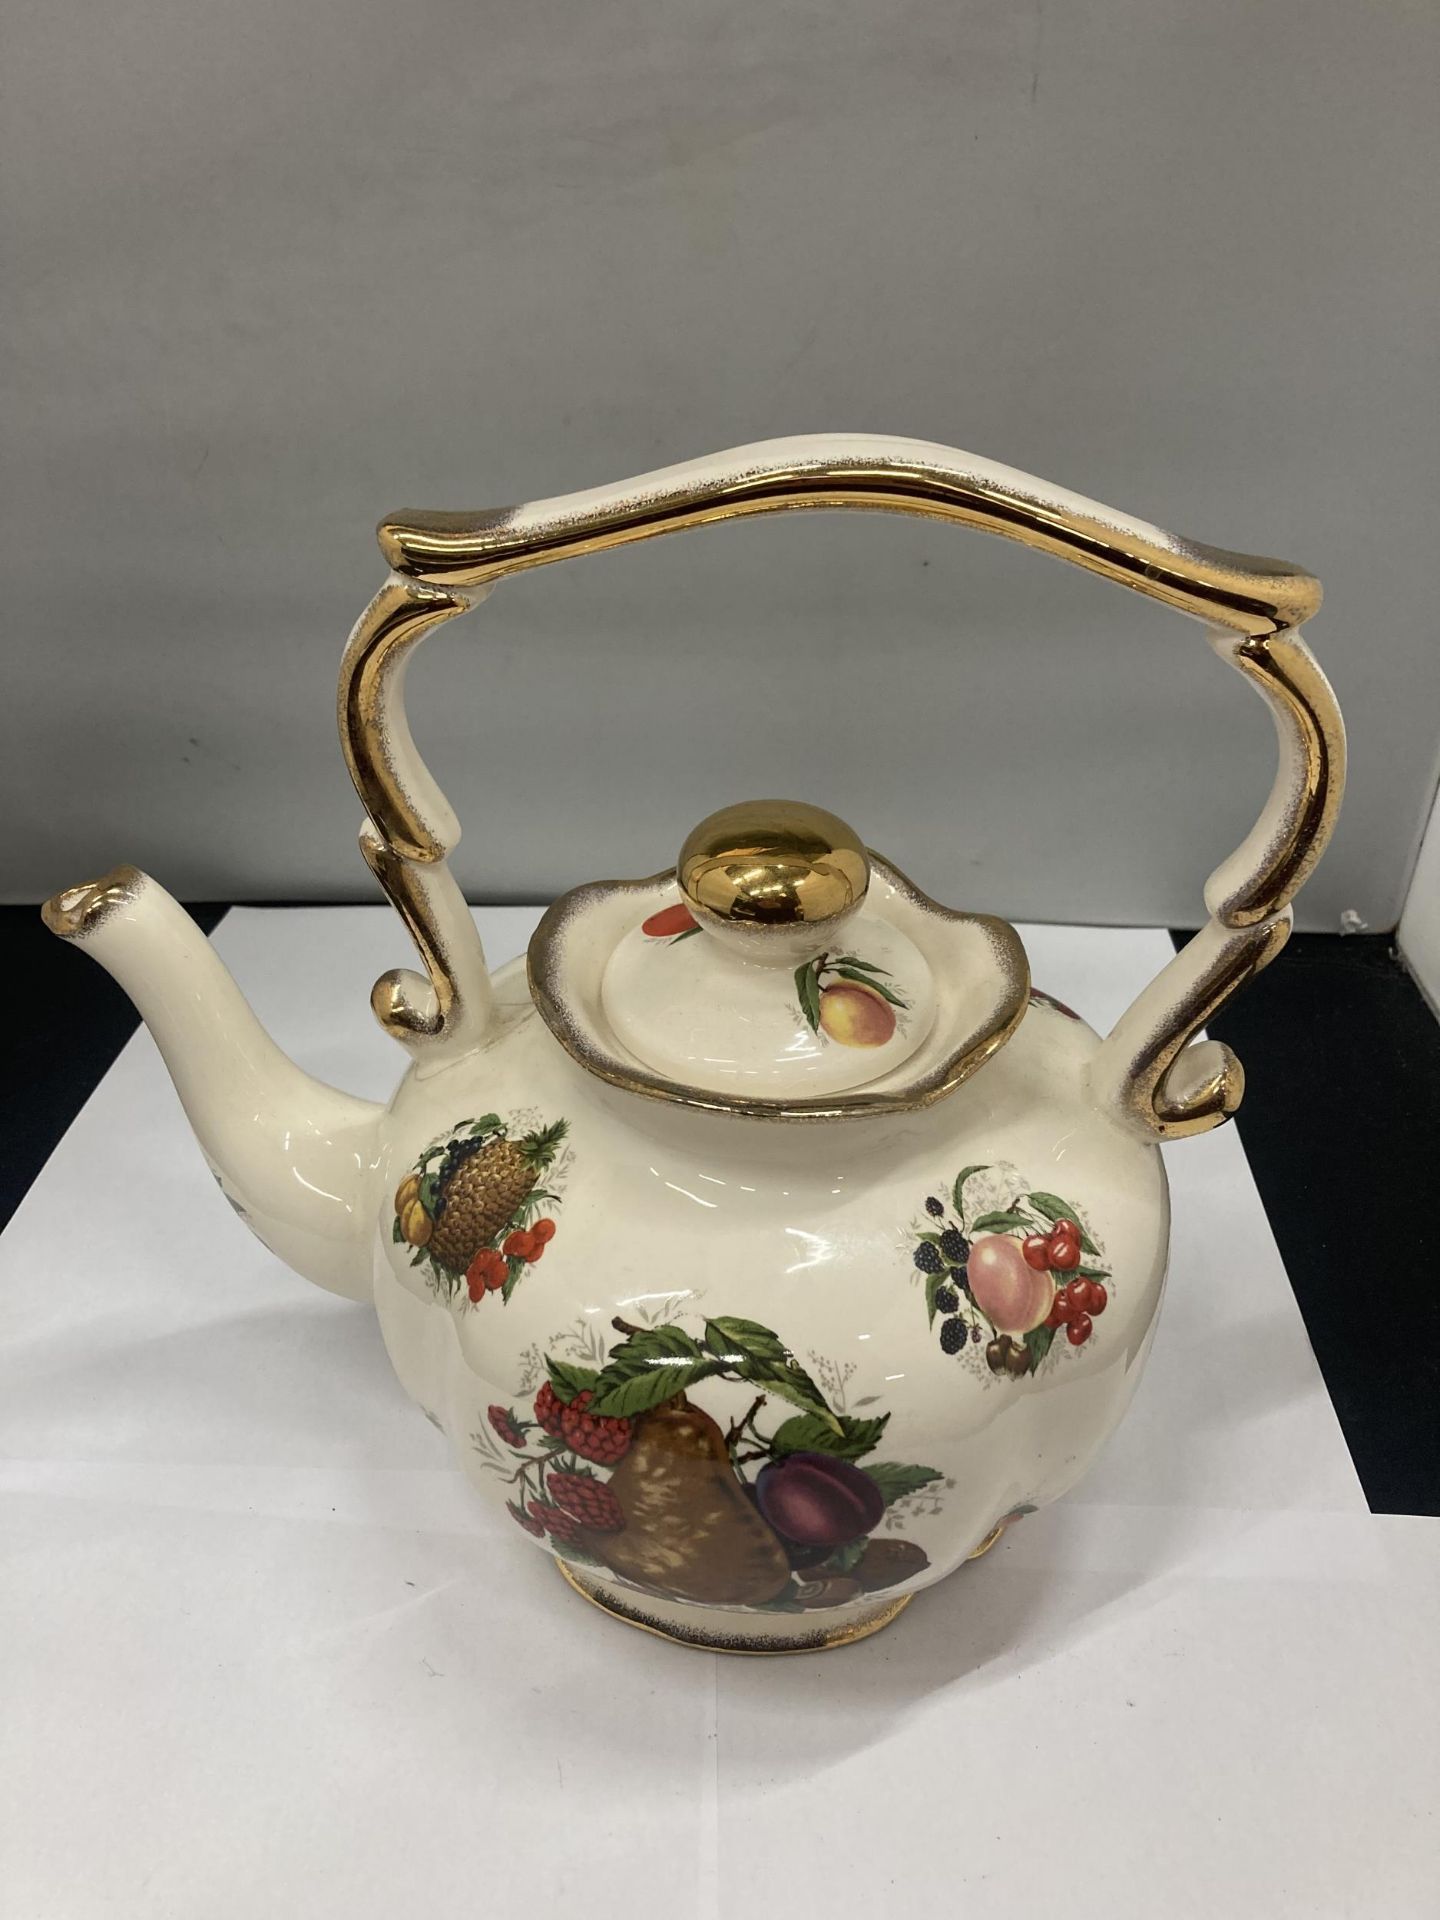 A POTTERY LARGE 'GYPSY' STYLE KETTLE WITH FRUIT DECORATION